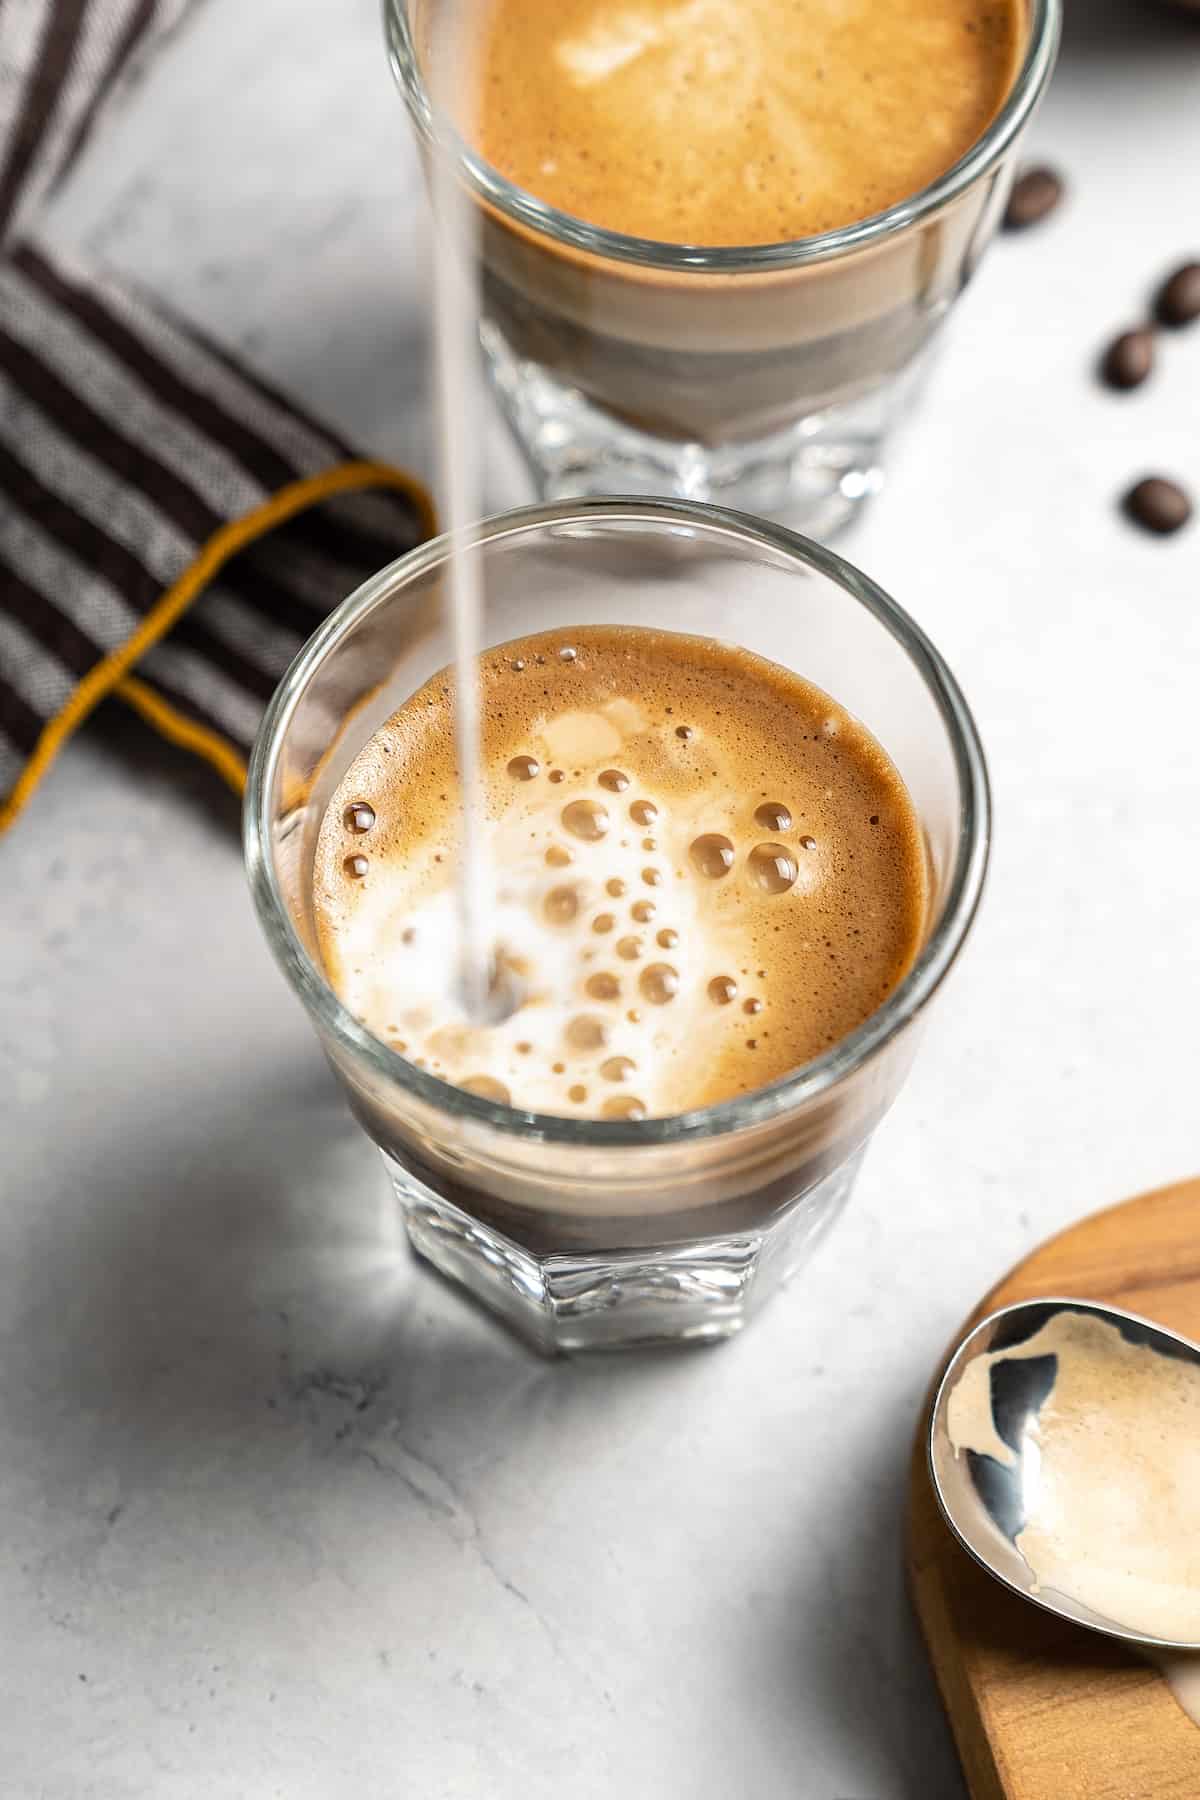 Pouring milk into a glass with coffee